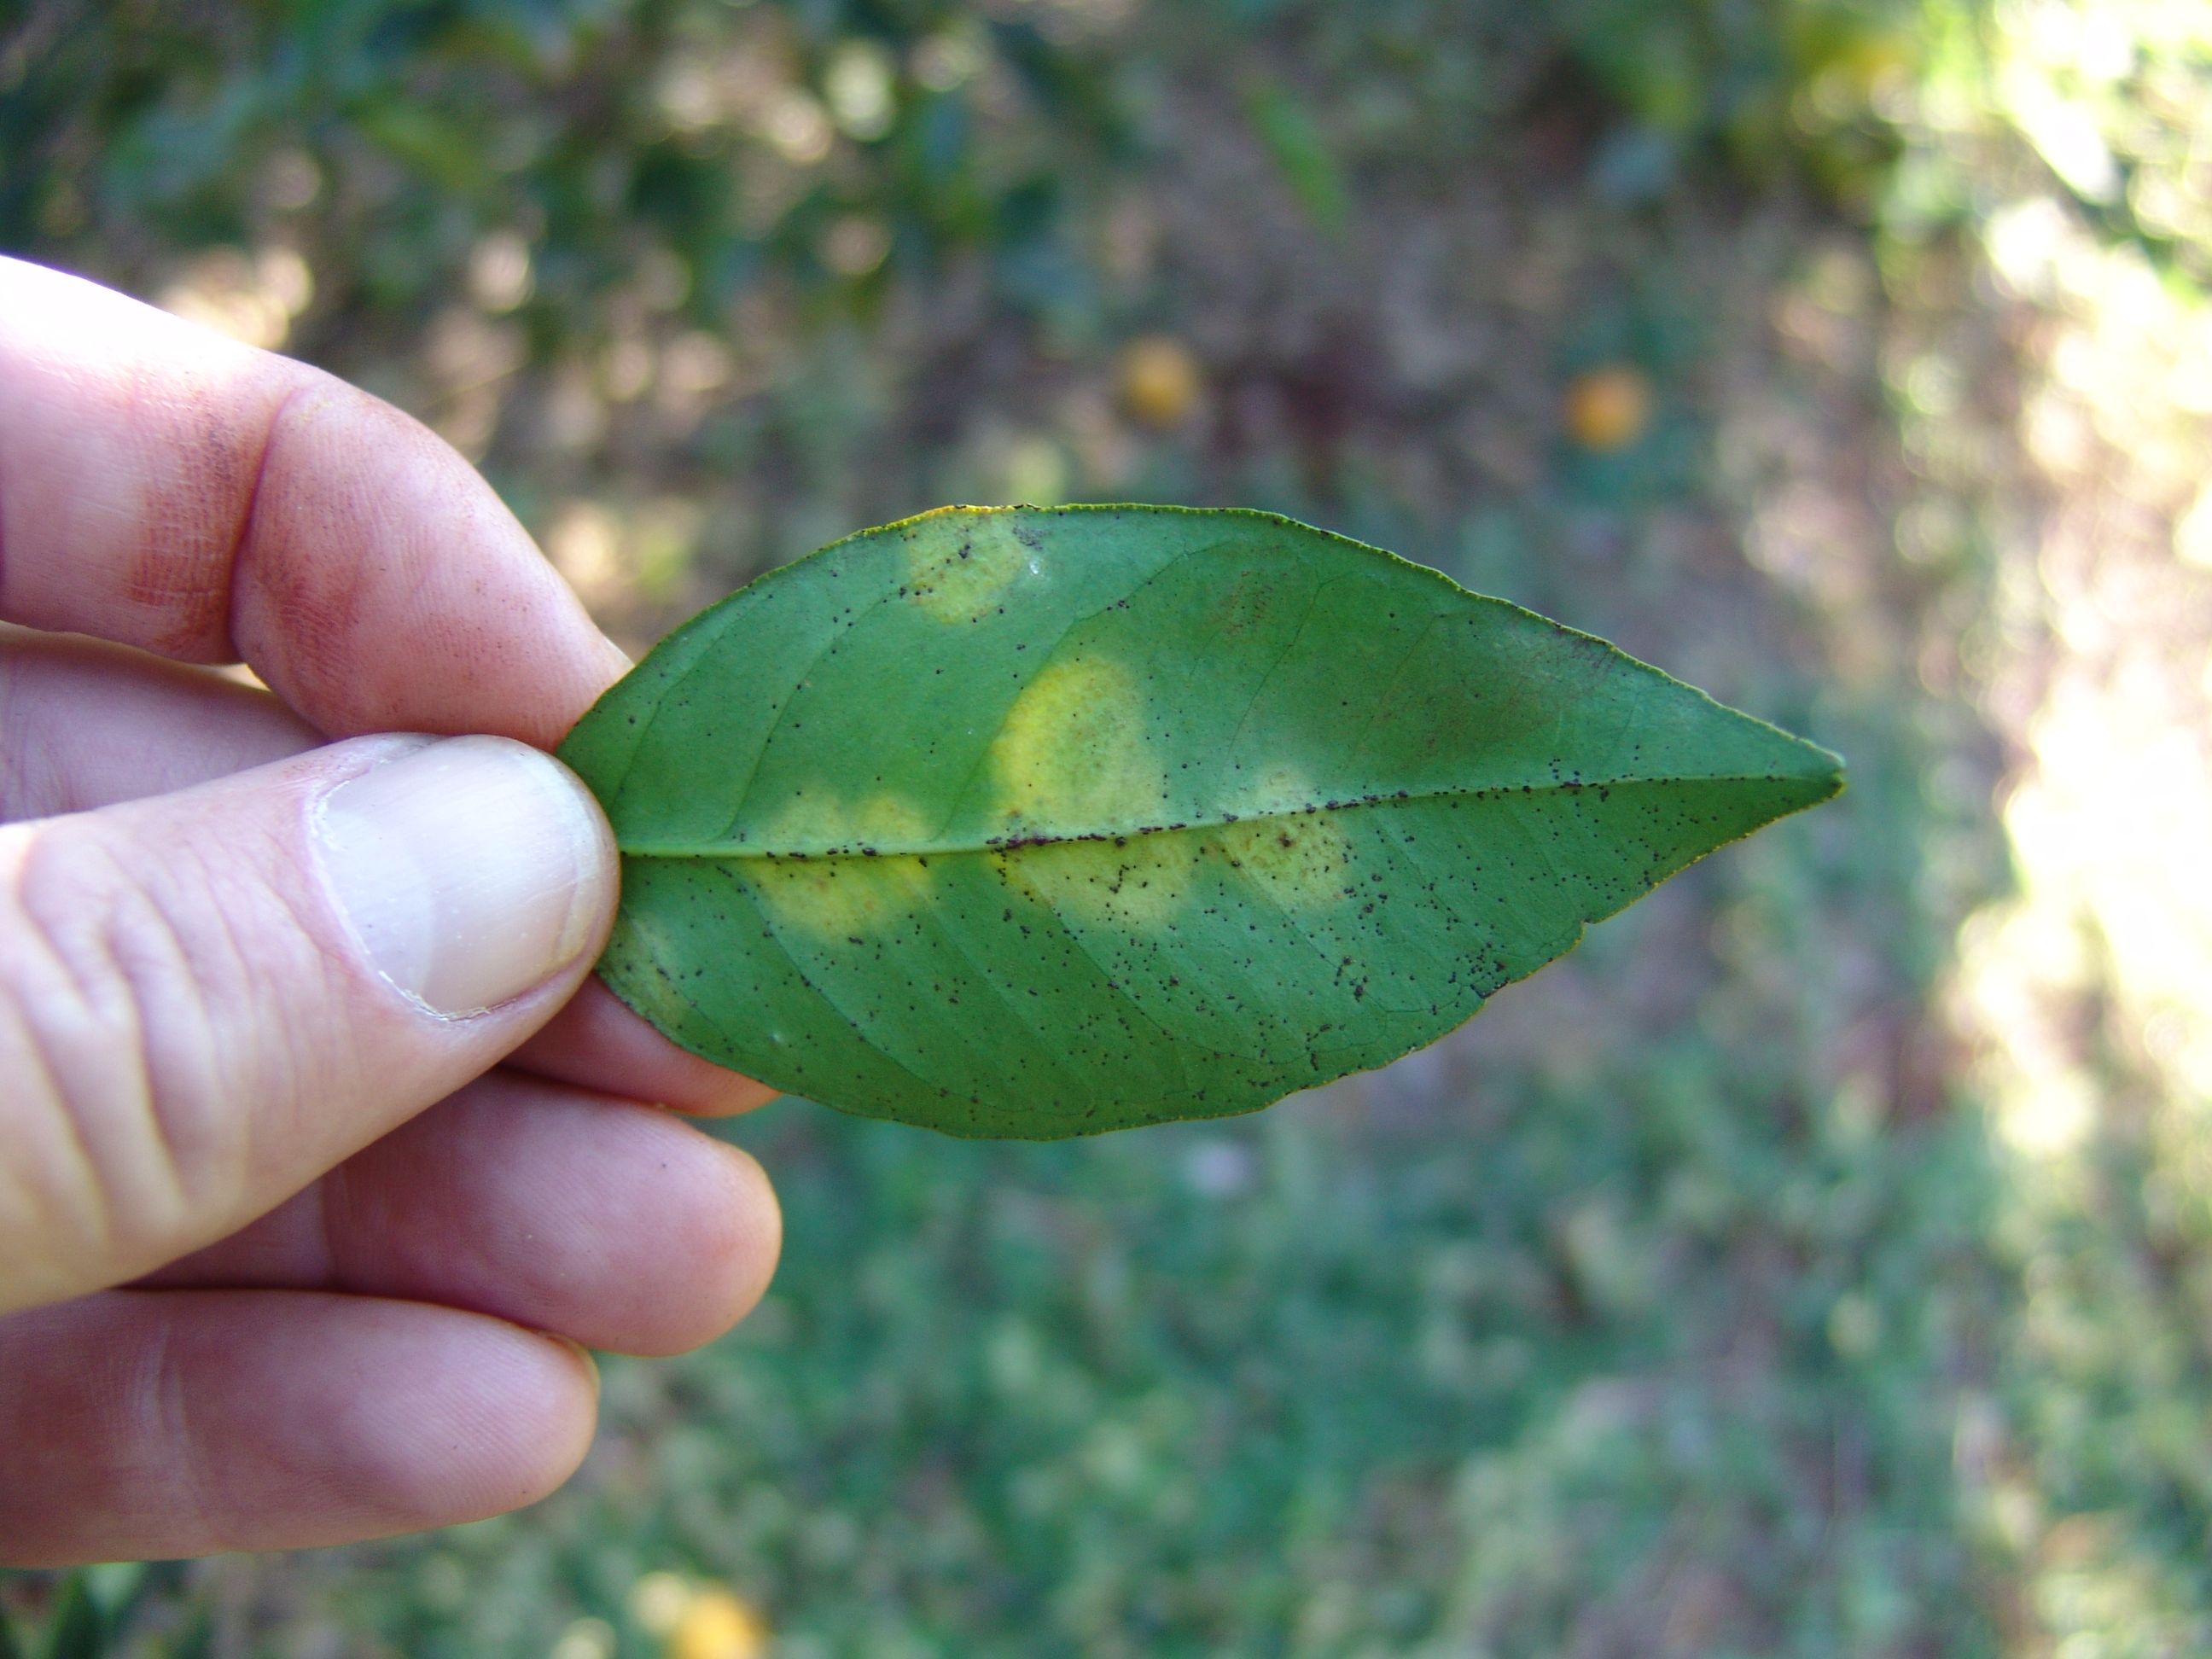 Chlorotic circular lesions (zone pattern) on under side of leaf.